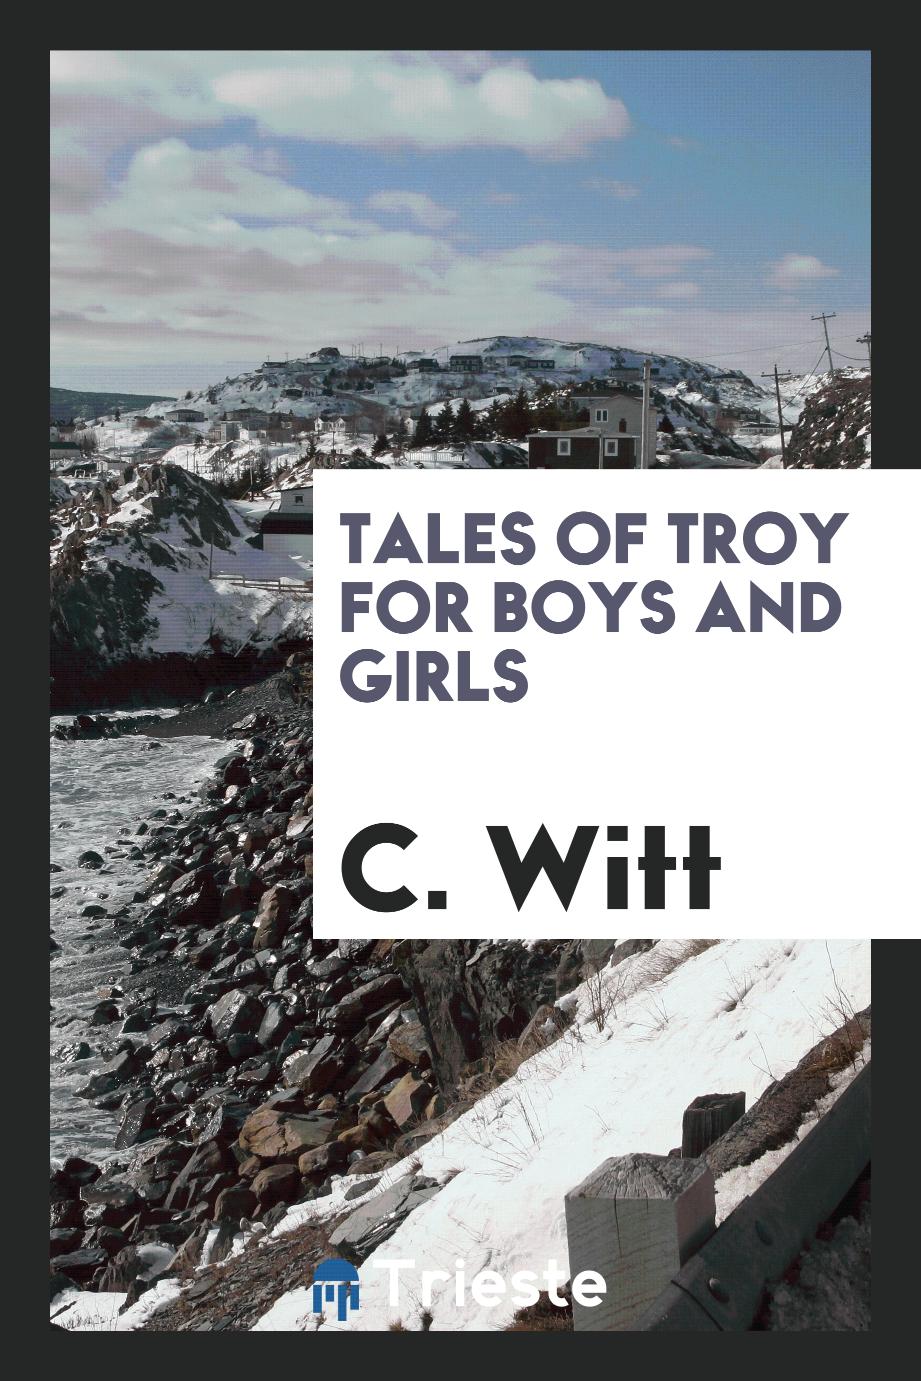 Tales of Troy for boys and girls